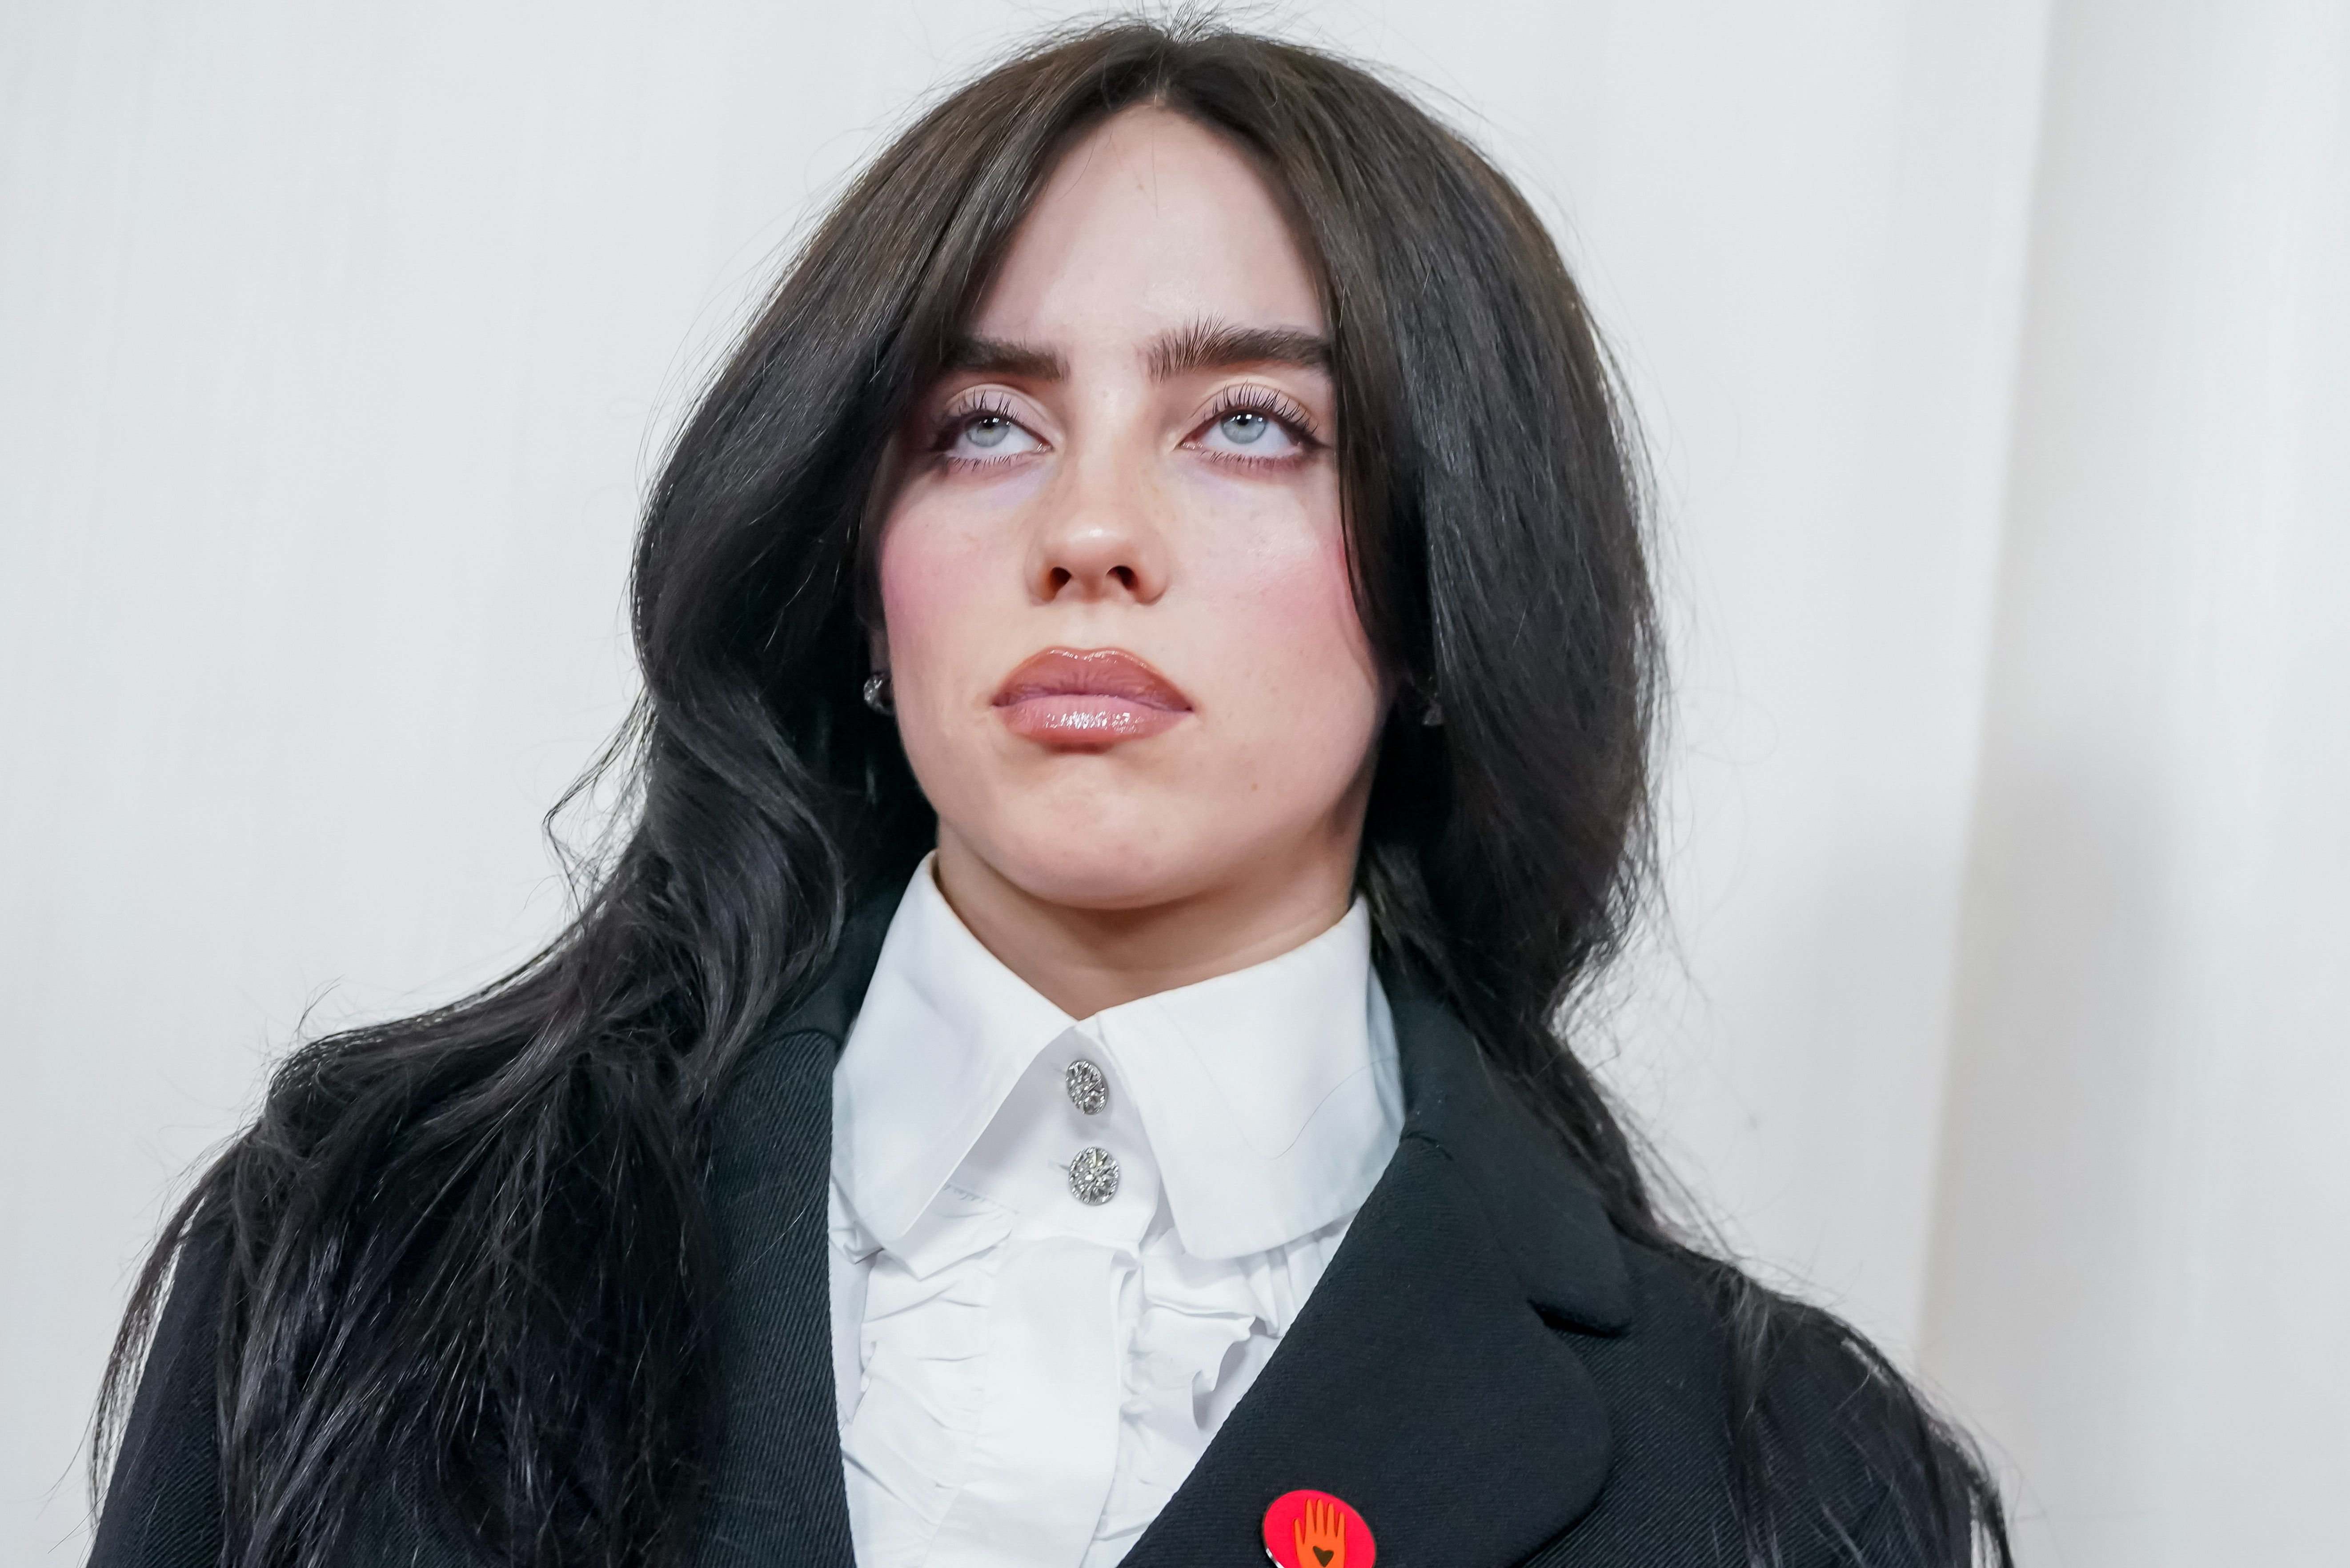 Billie Eilish at the 2024 Oscars, sporting a red ceasefire pin